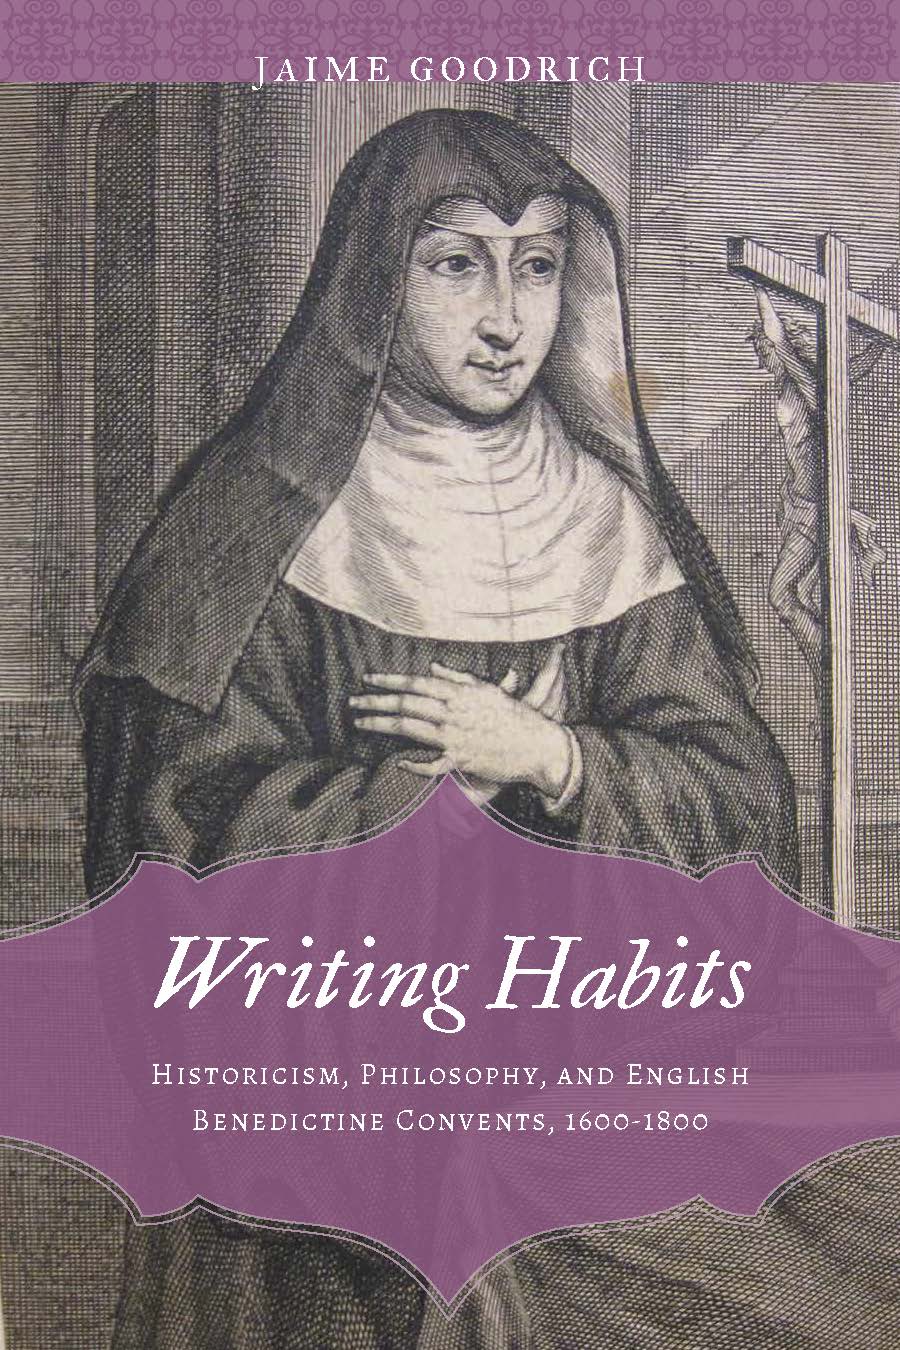 Writing Habits-Historicism, Philosophy, and English Benedictine Convents book cover